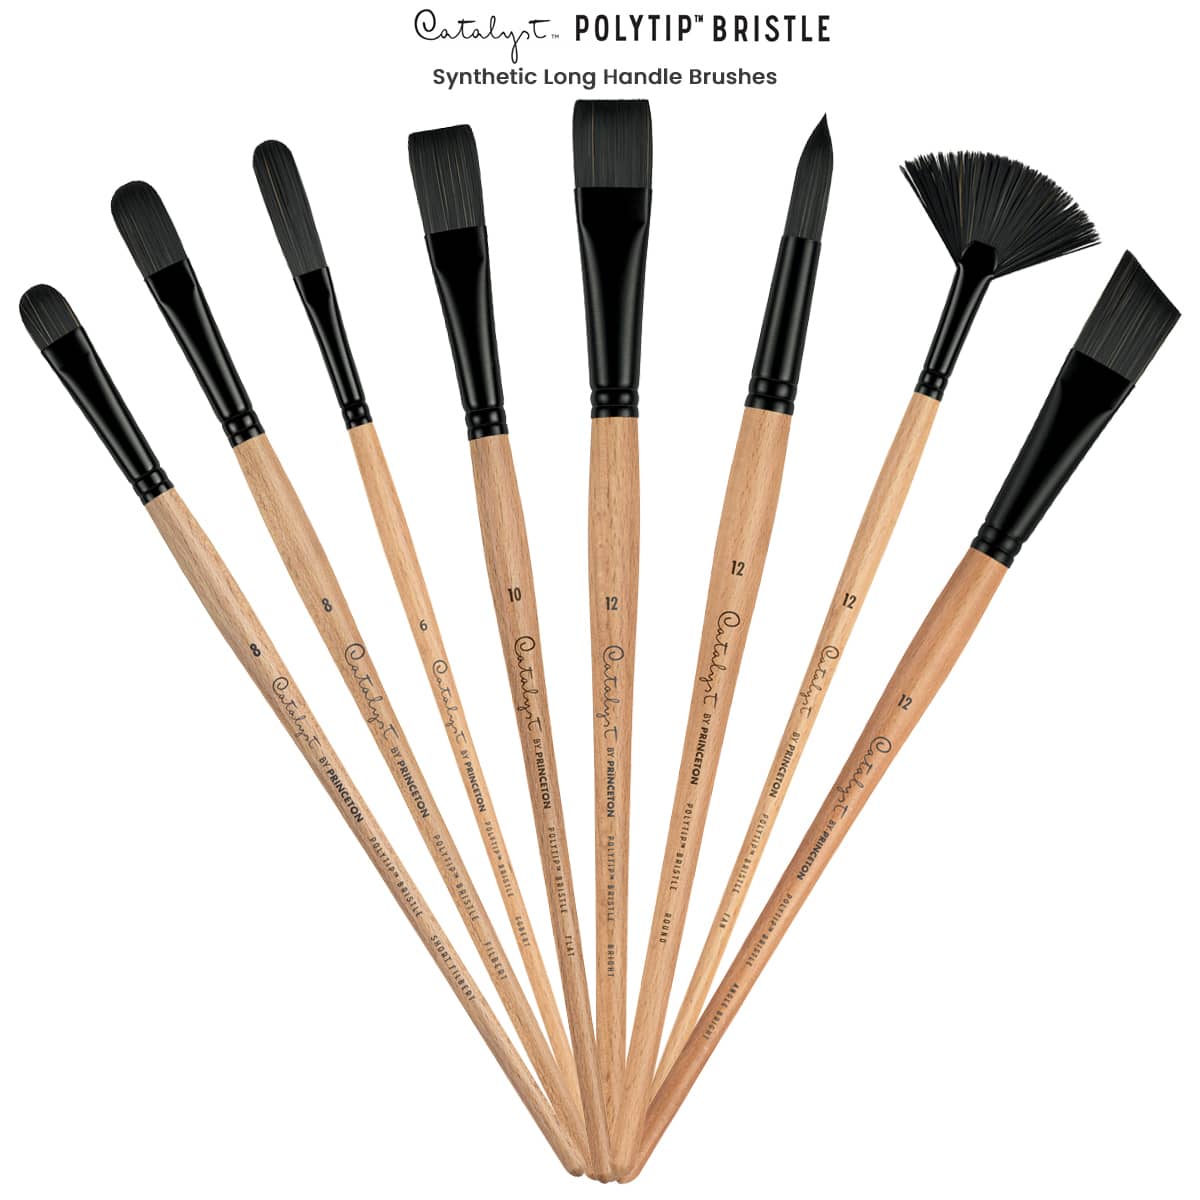 Princeton Catalyst Polytip Bristle Synthetic Long Handle Brushes